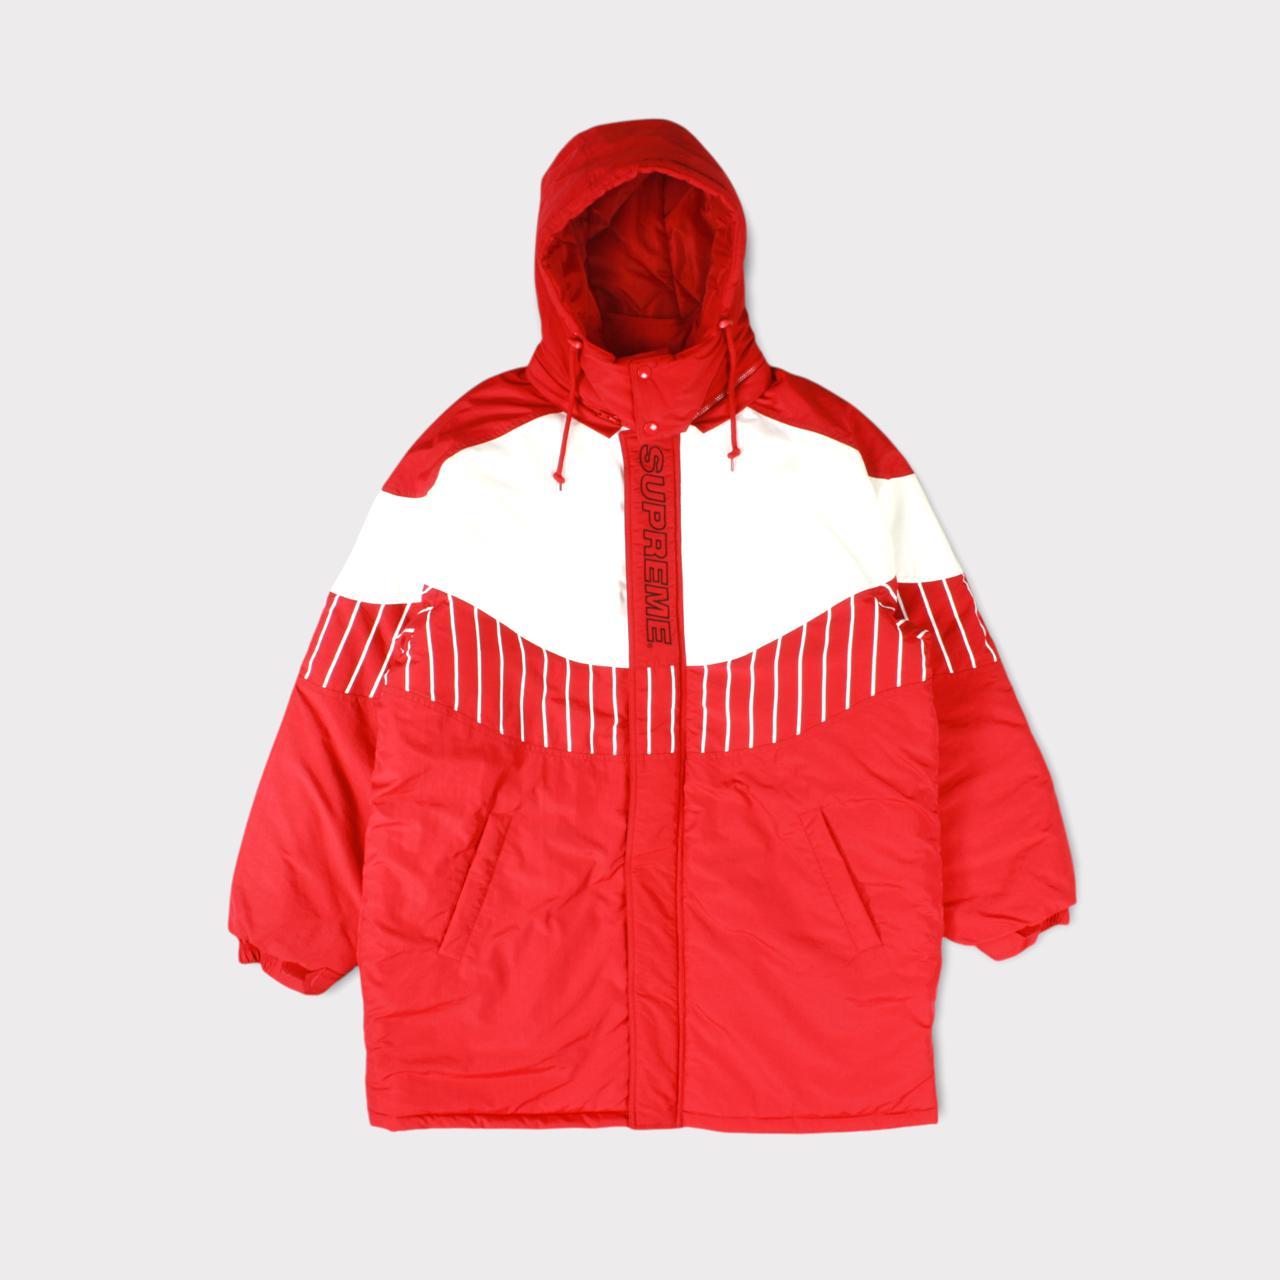 Supreme Men's Red and White Jacket